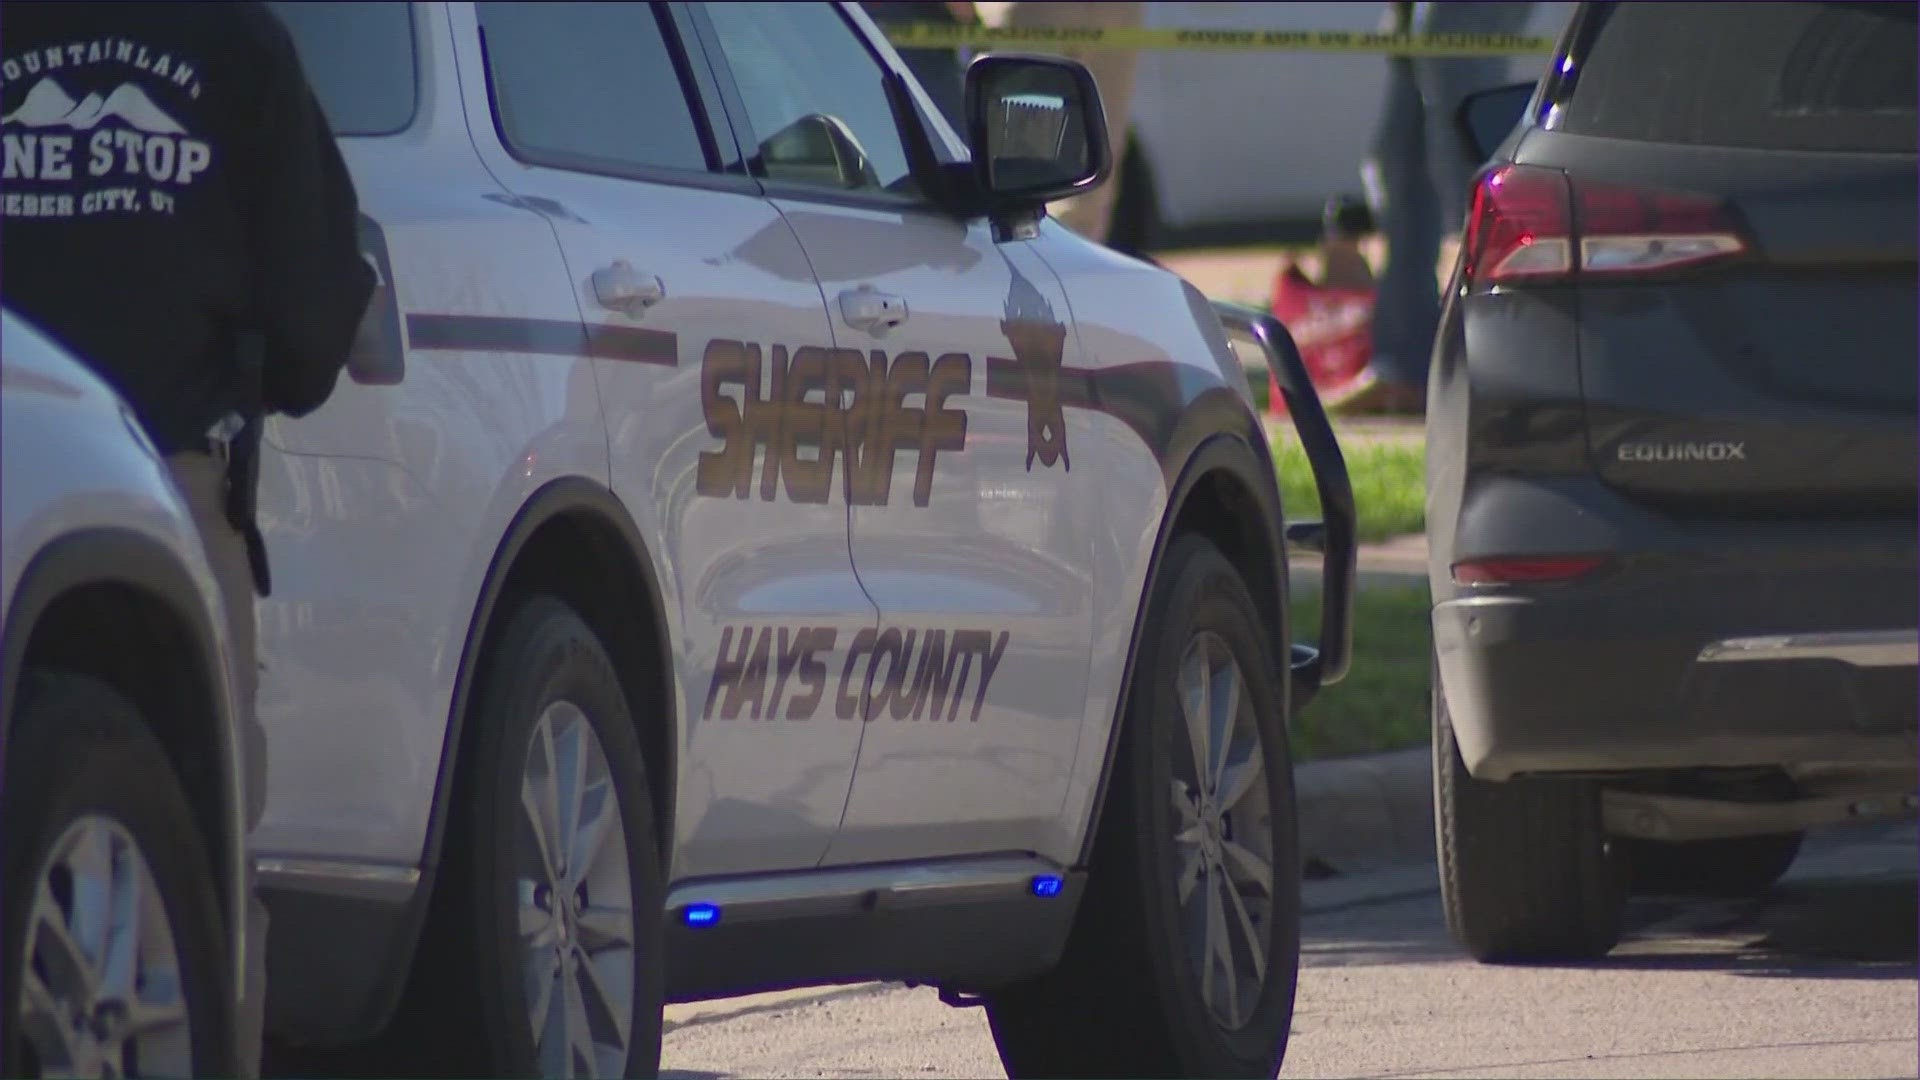 The Hays County Sheriff's Office said two deputies fired their guns at the suspect after he refused to drop two knives he was holding.